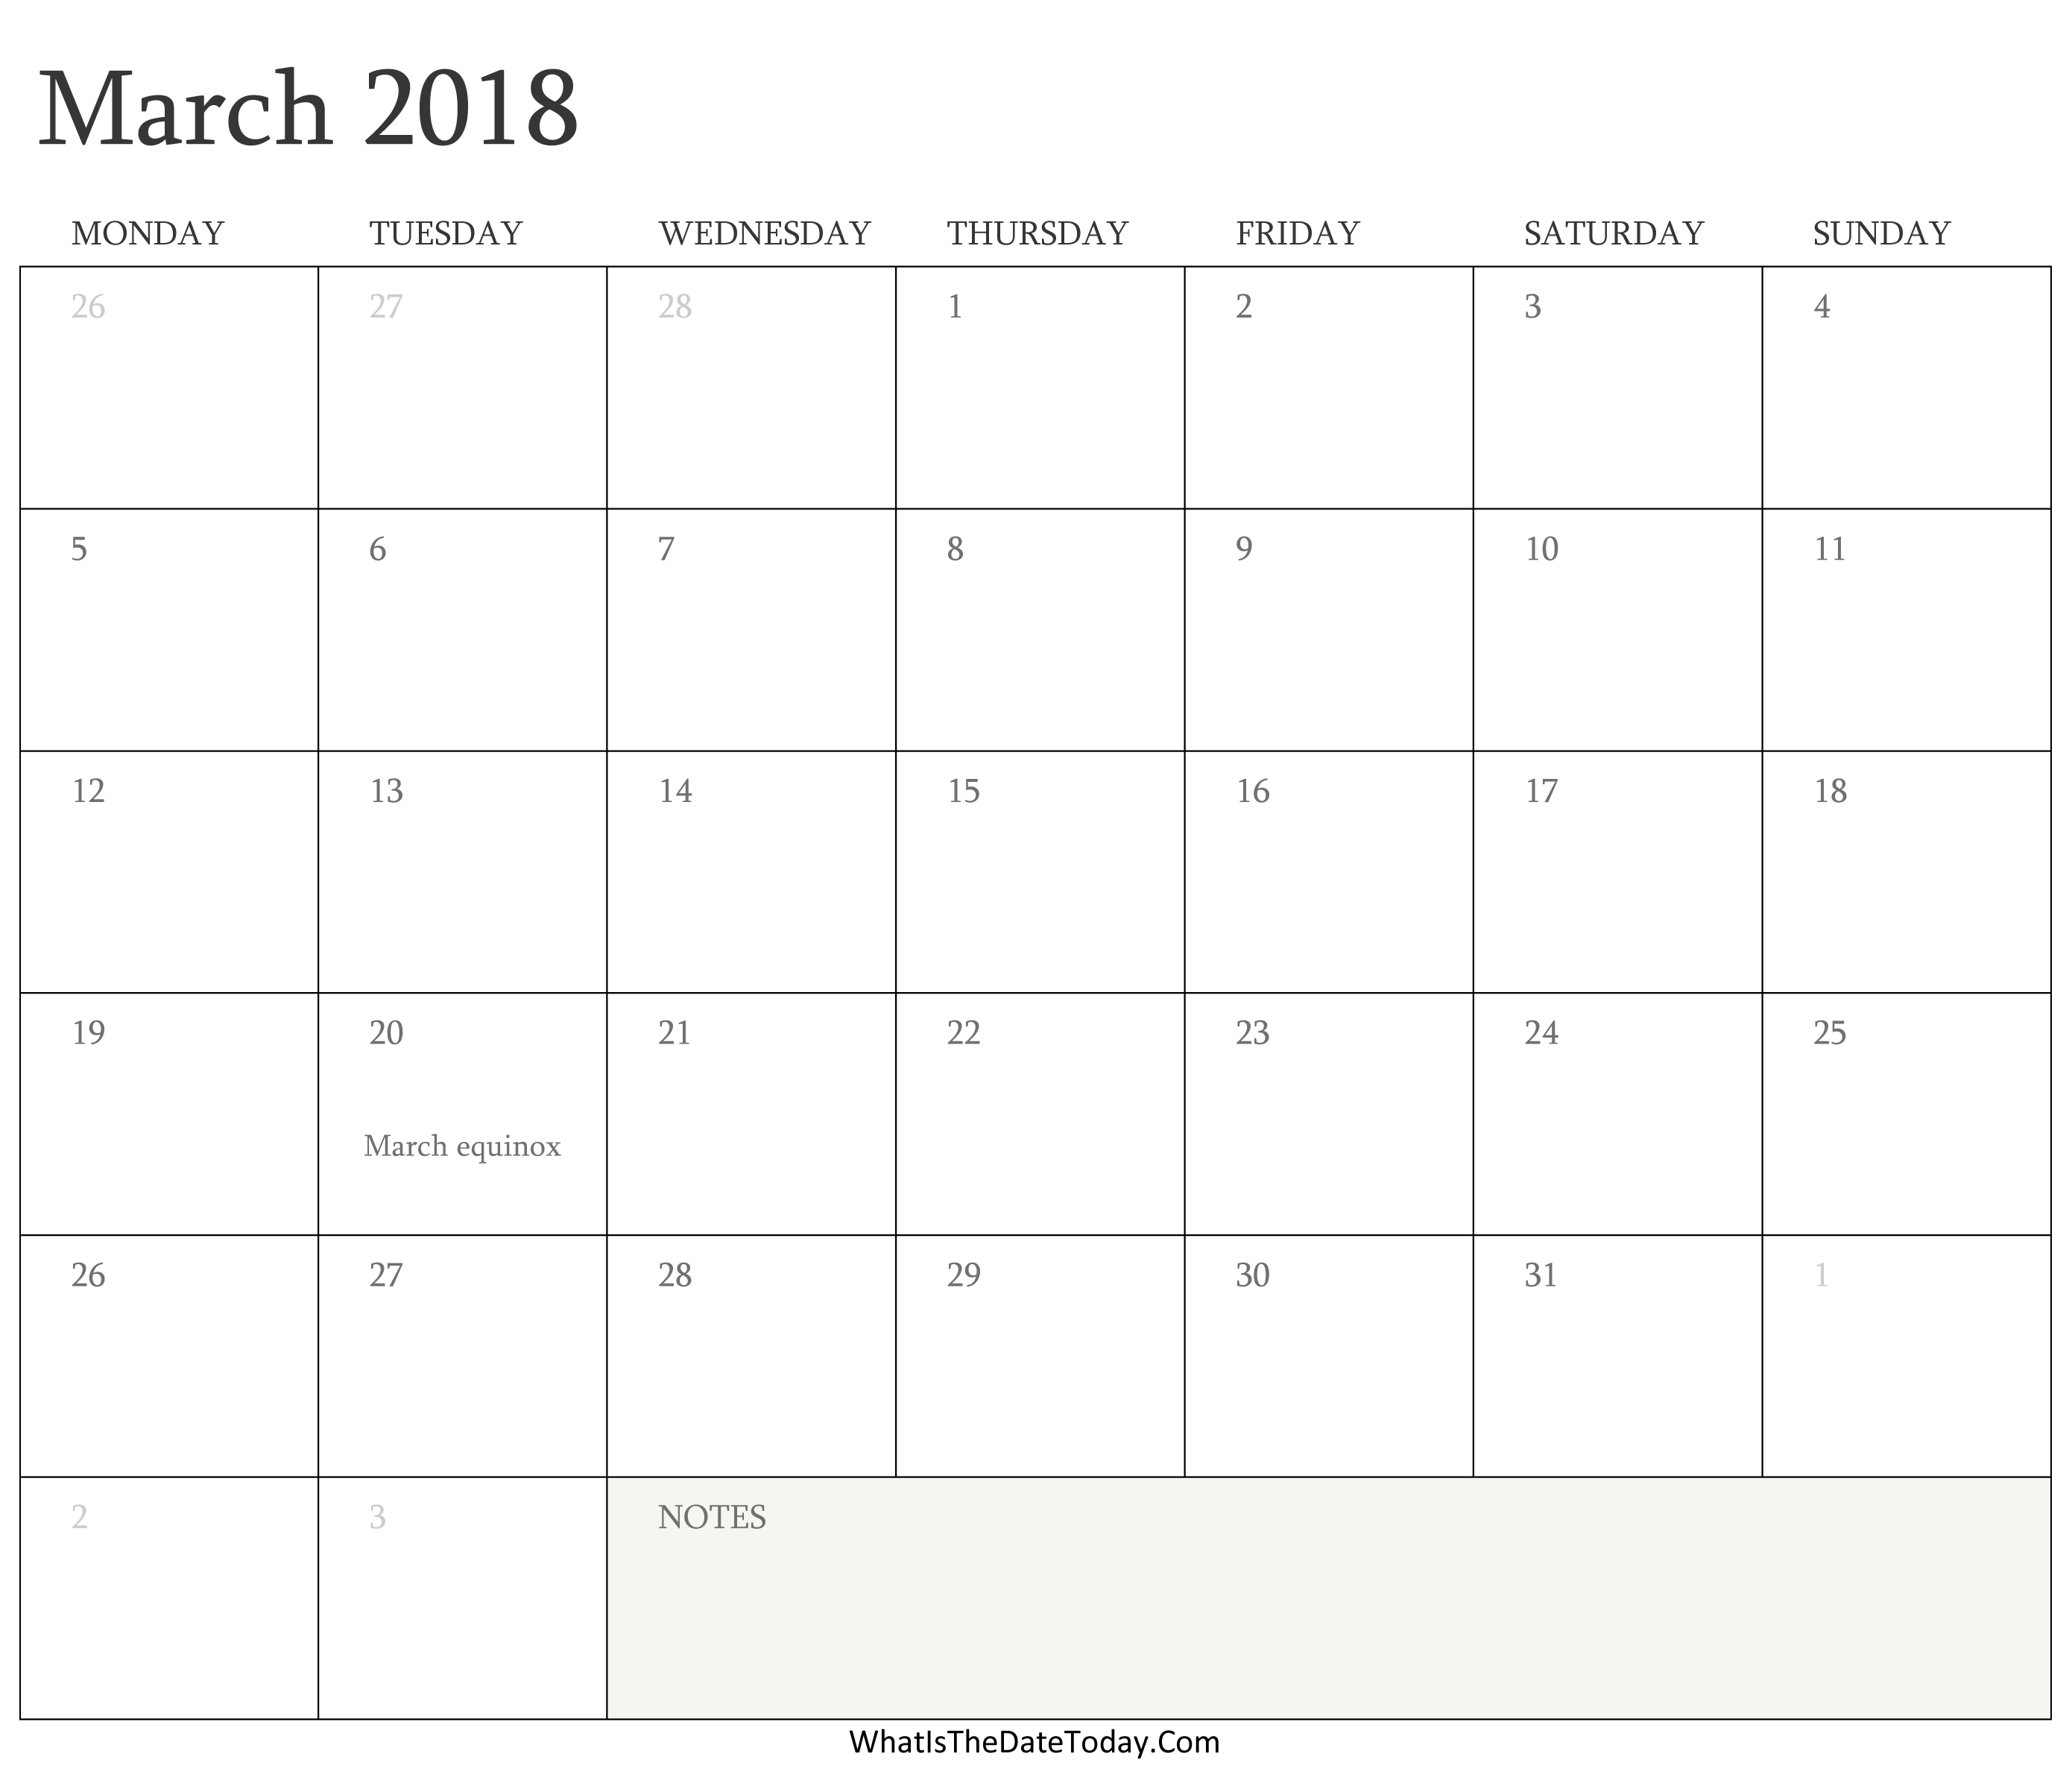 editable-calendar-march-2018-with-holidays-whatisthedatetoday-com